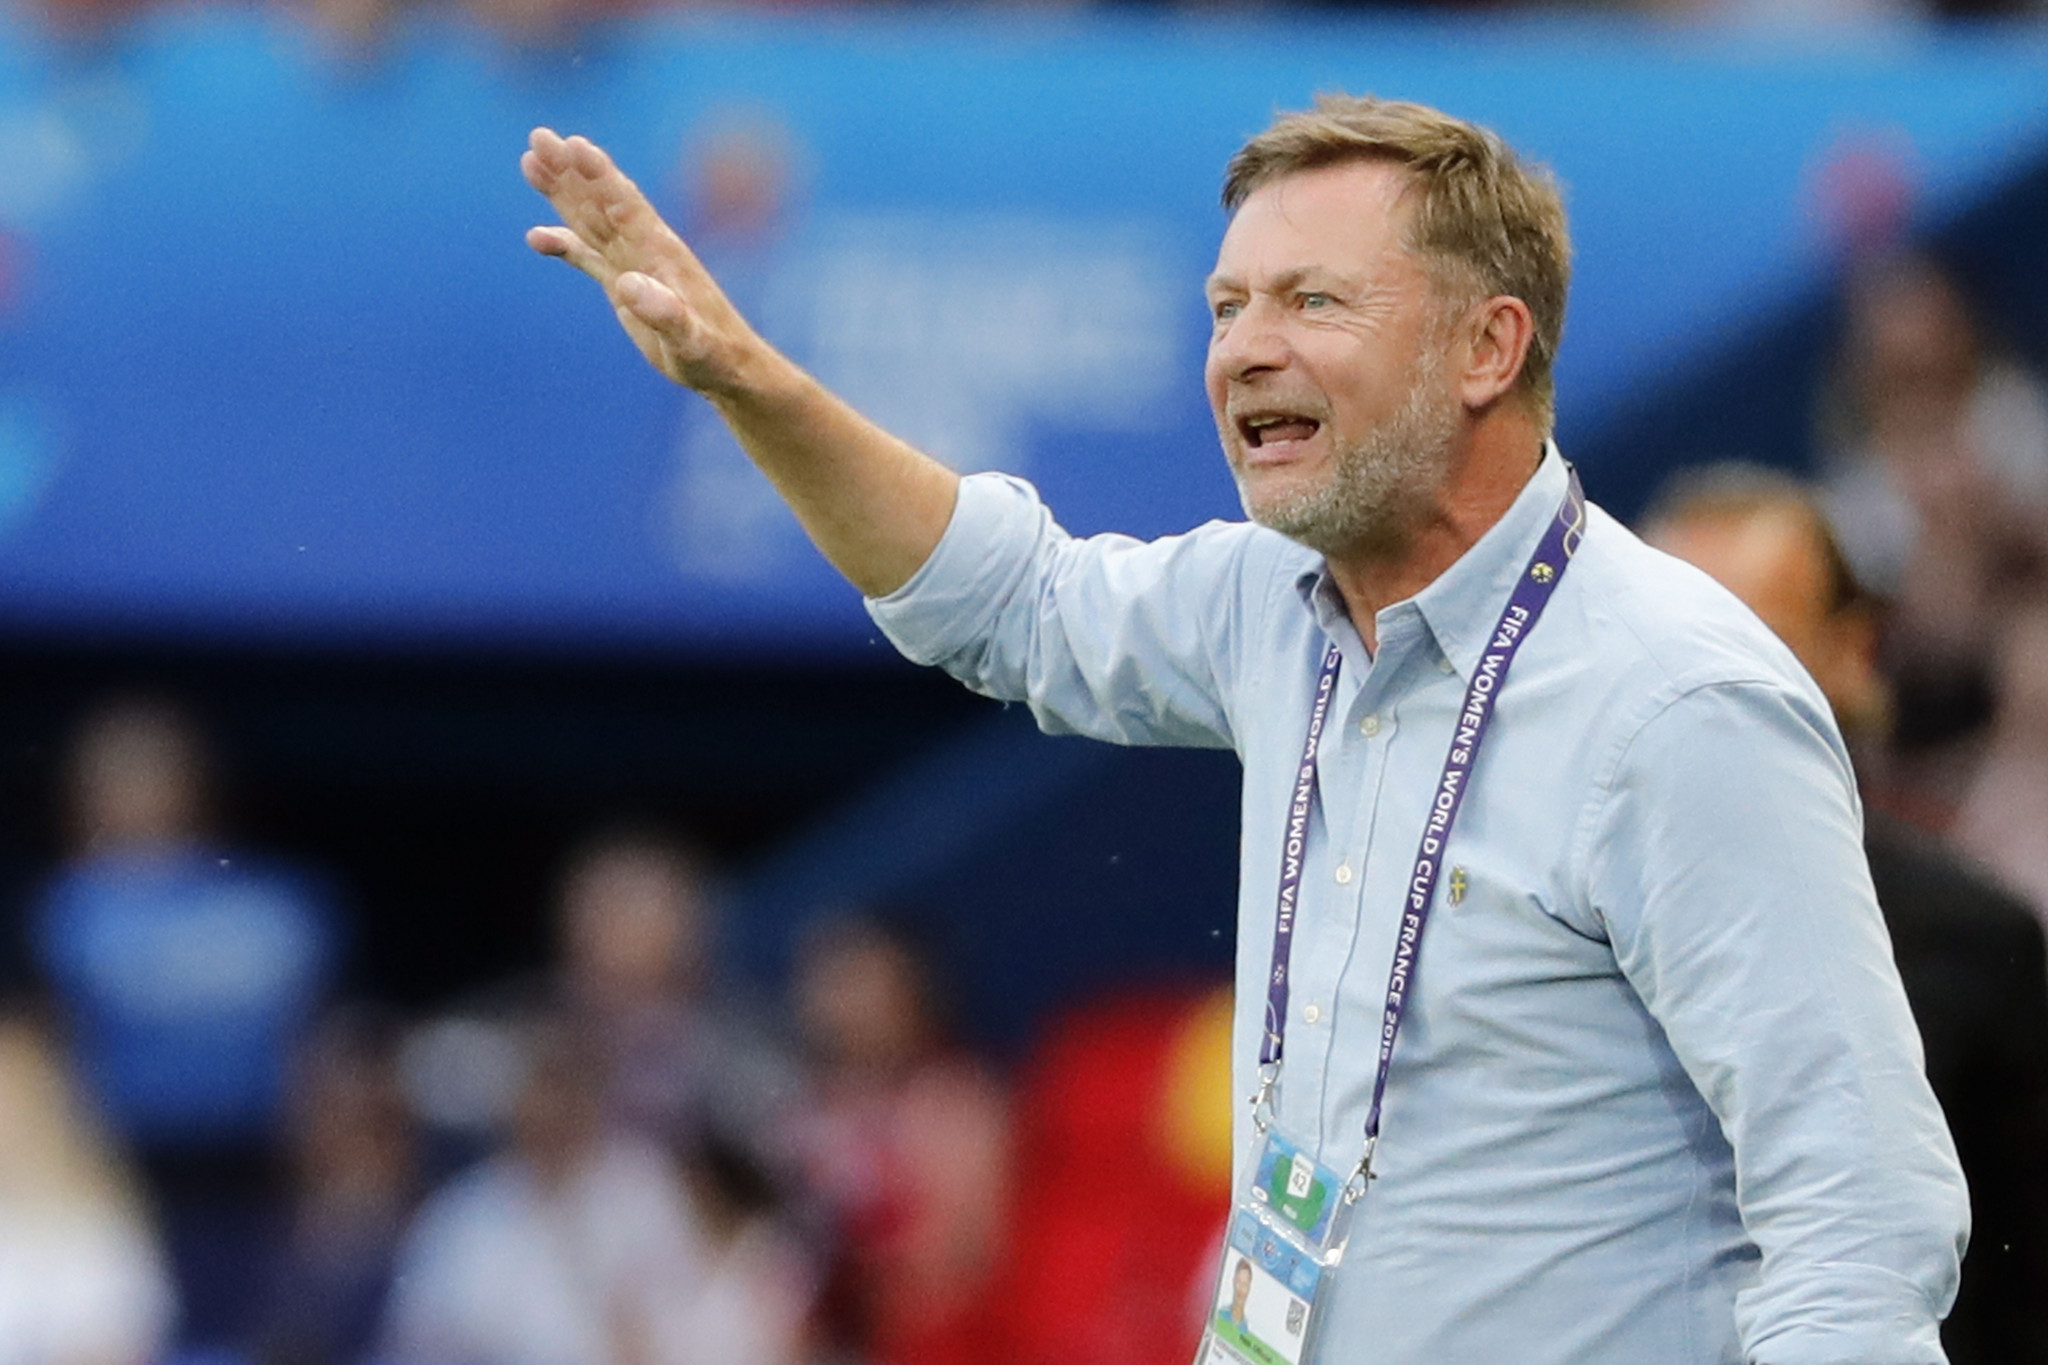 Peter Gerhardsson's side will go onto face Germany in the quarter-finals on Saturday (June 29) ©Getty Images